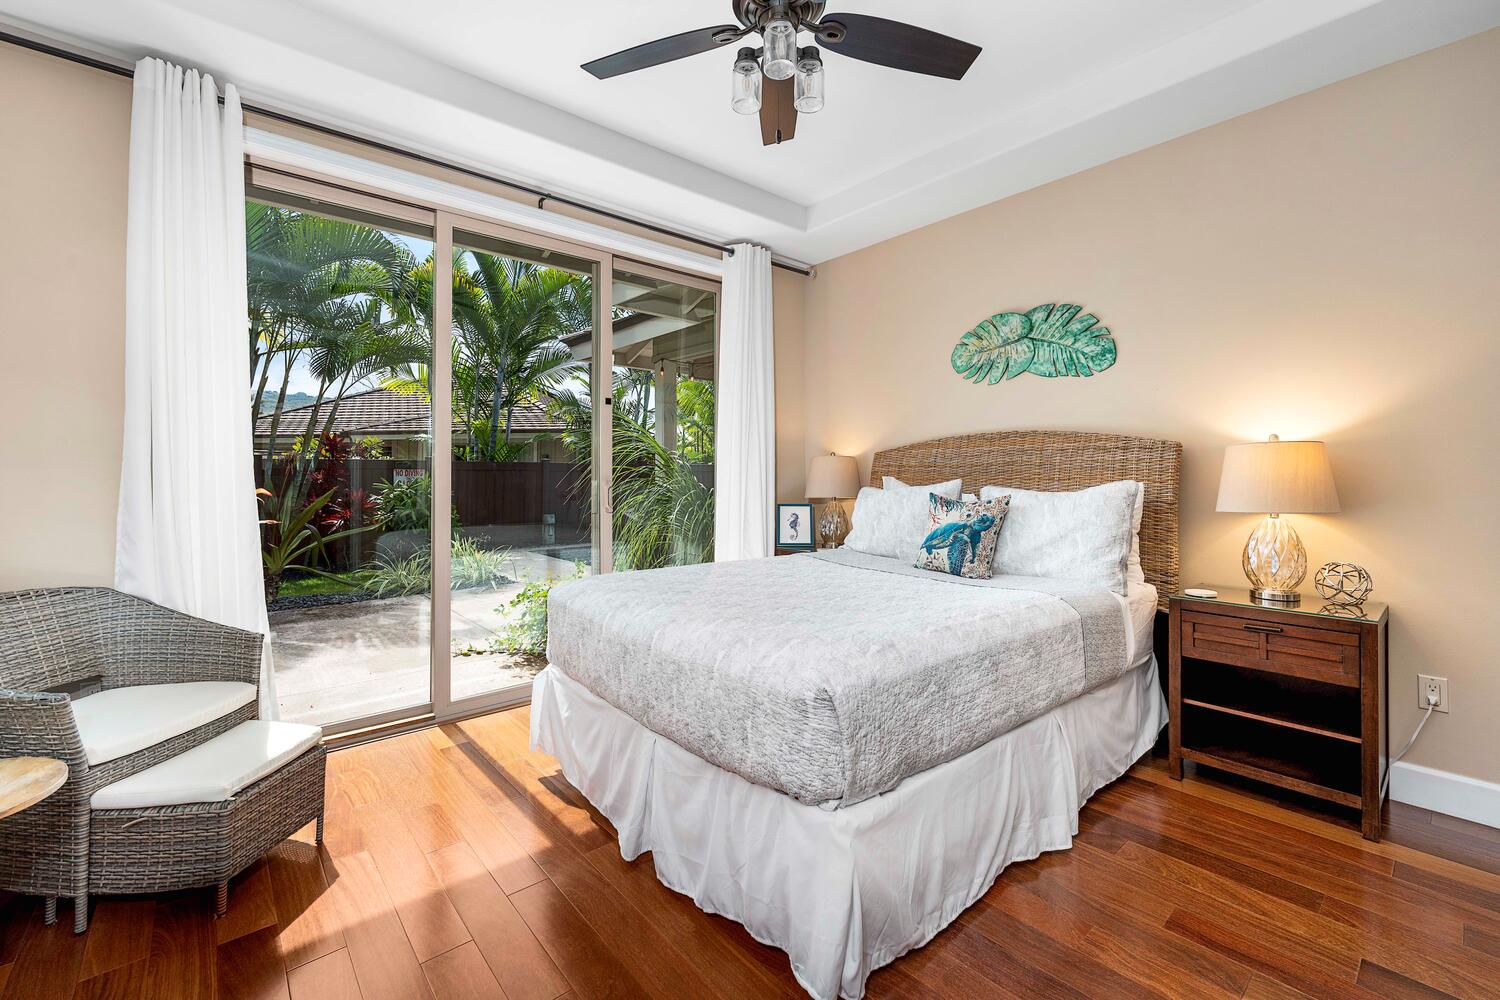 Kailua Kona Vacation Rentals, Holua Kai #32 - The third guest bedroom with queen bed, ensuite bathroom and private lanai.